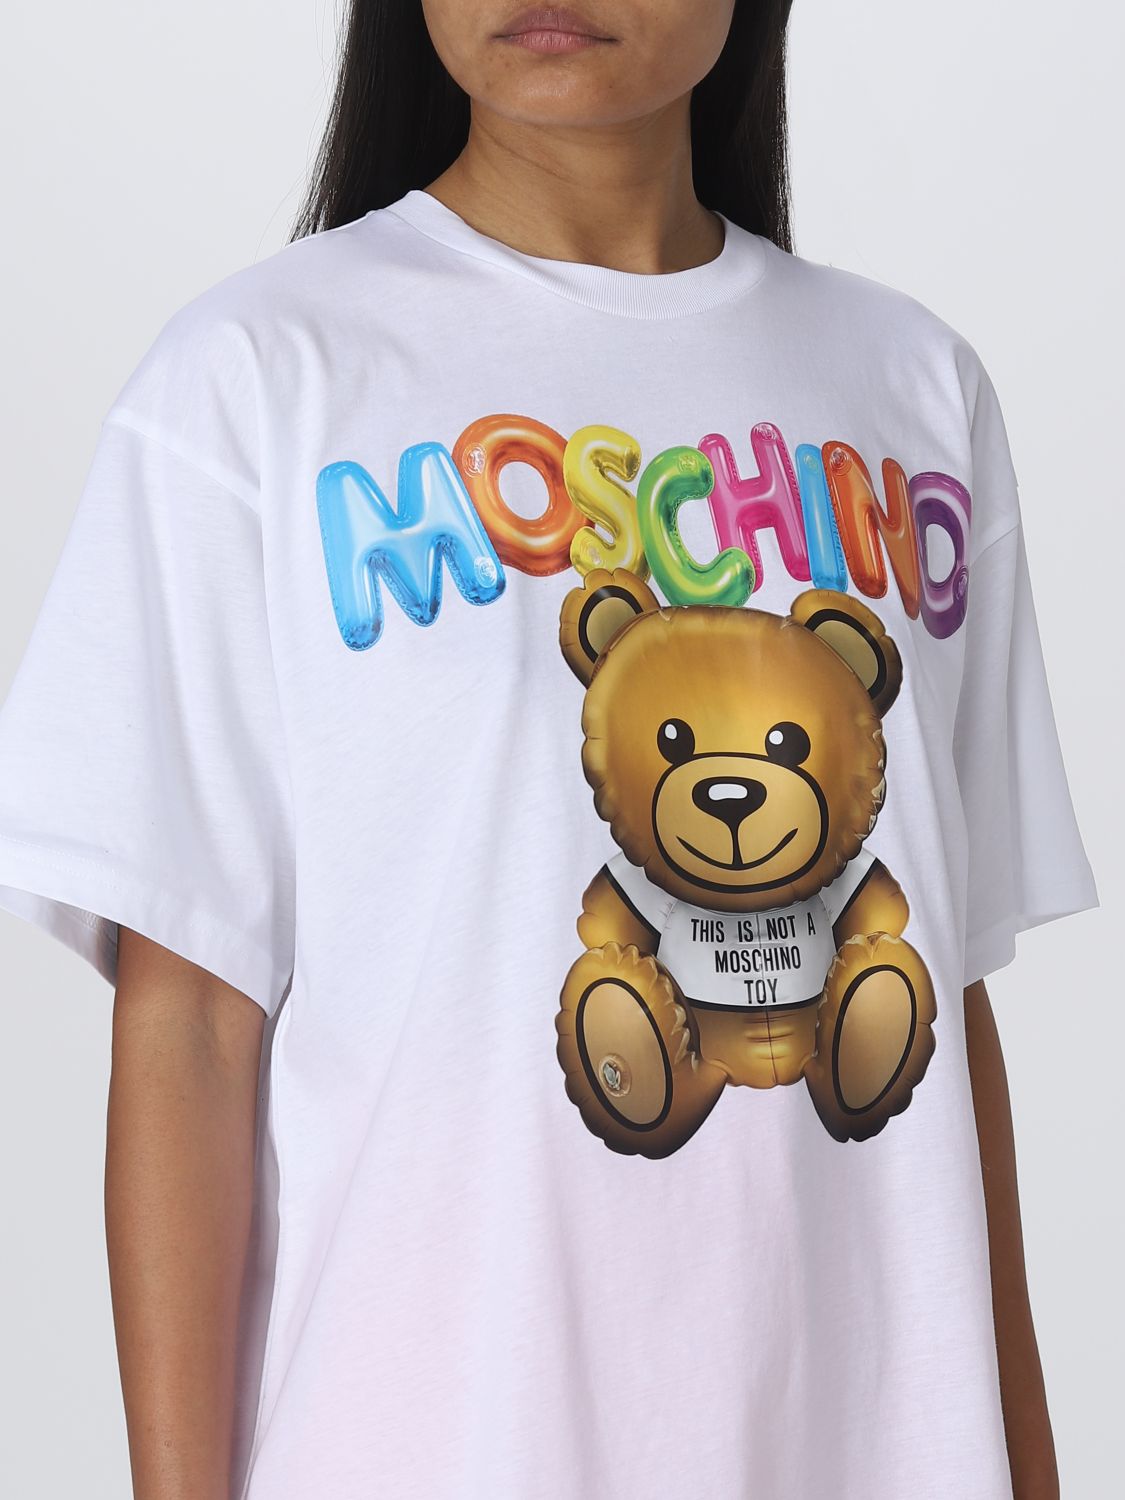 COUTURE: t-shirt for woman White | Moschino Couture t-shirt 07010441 online GIGLIO.COM